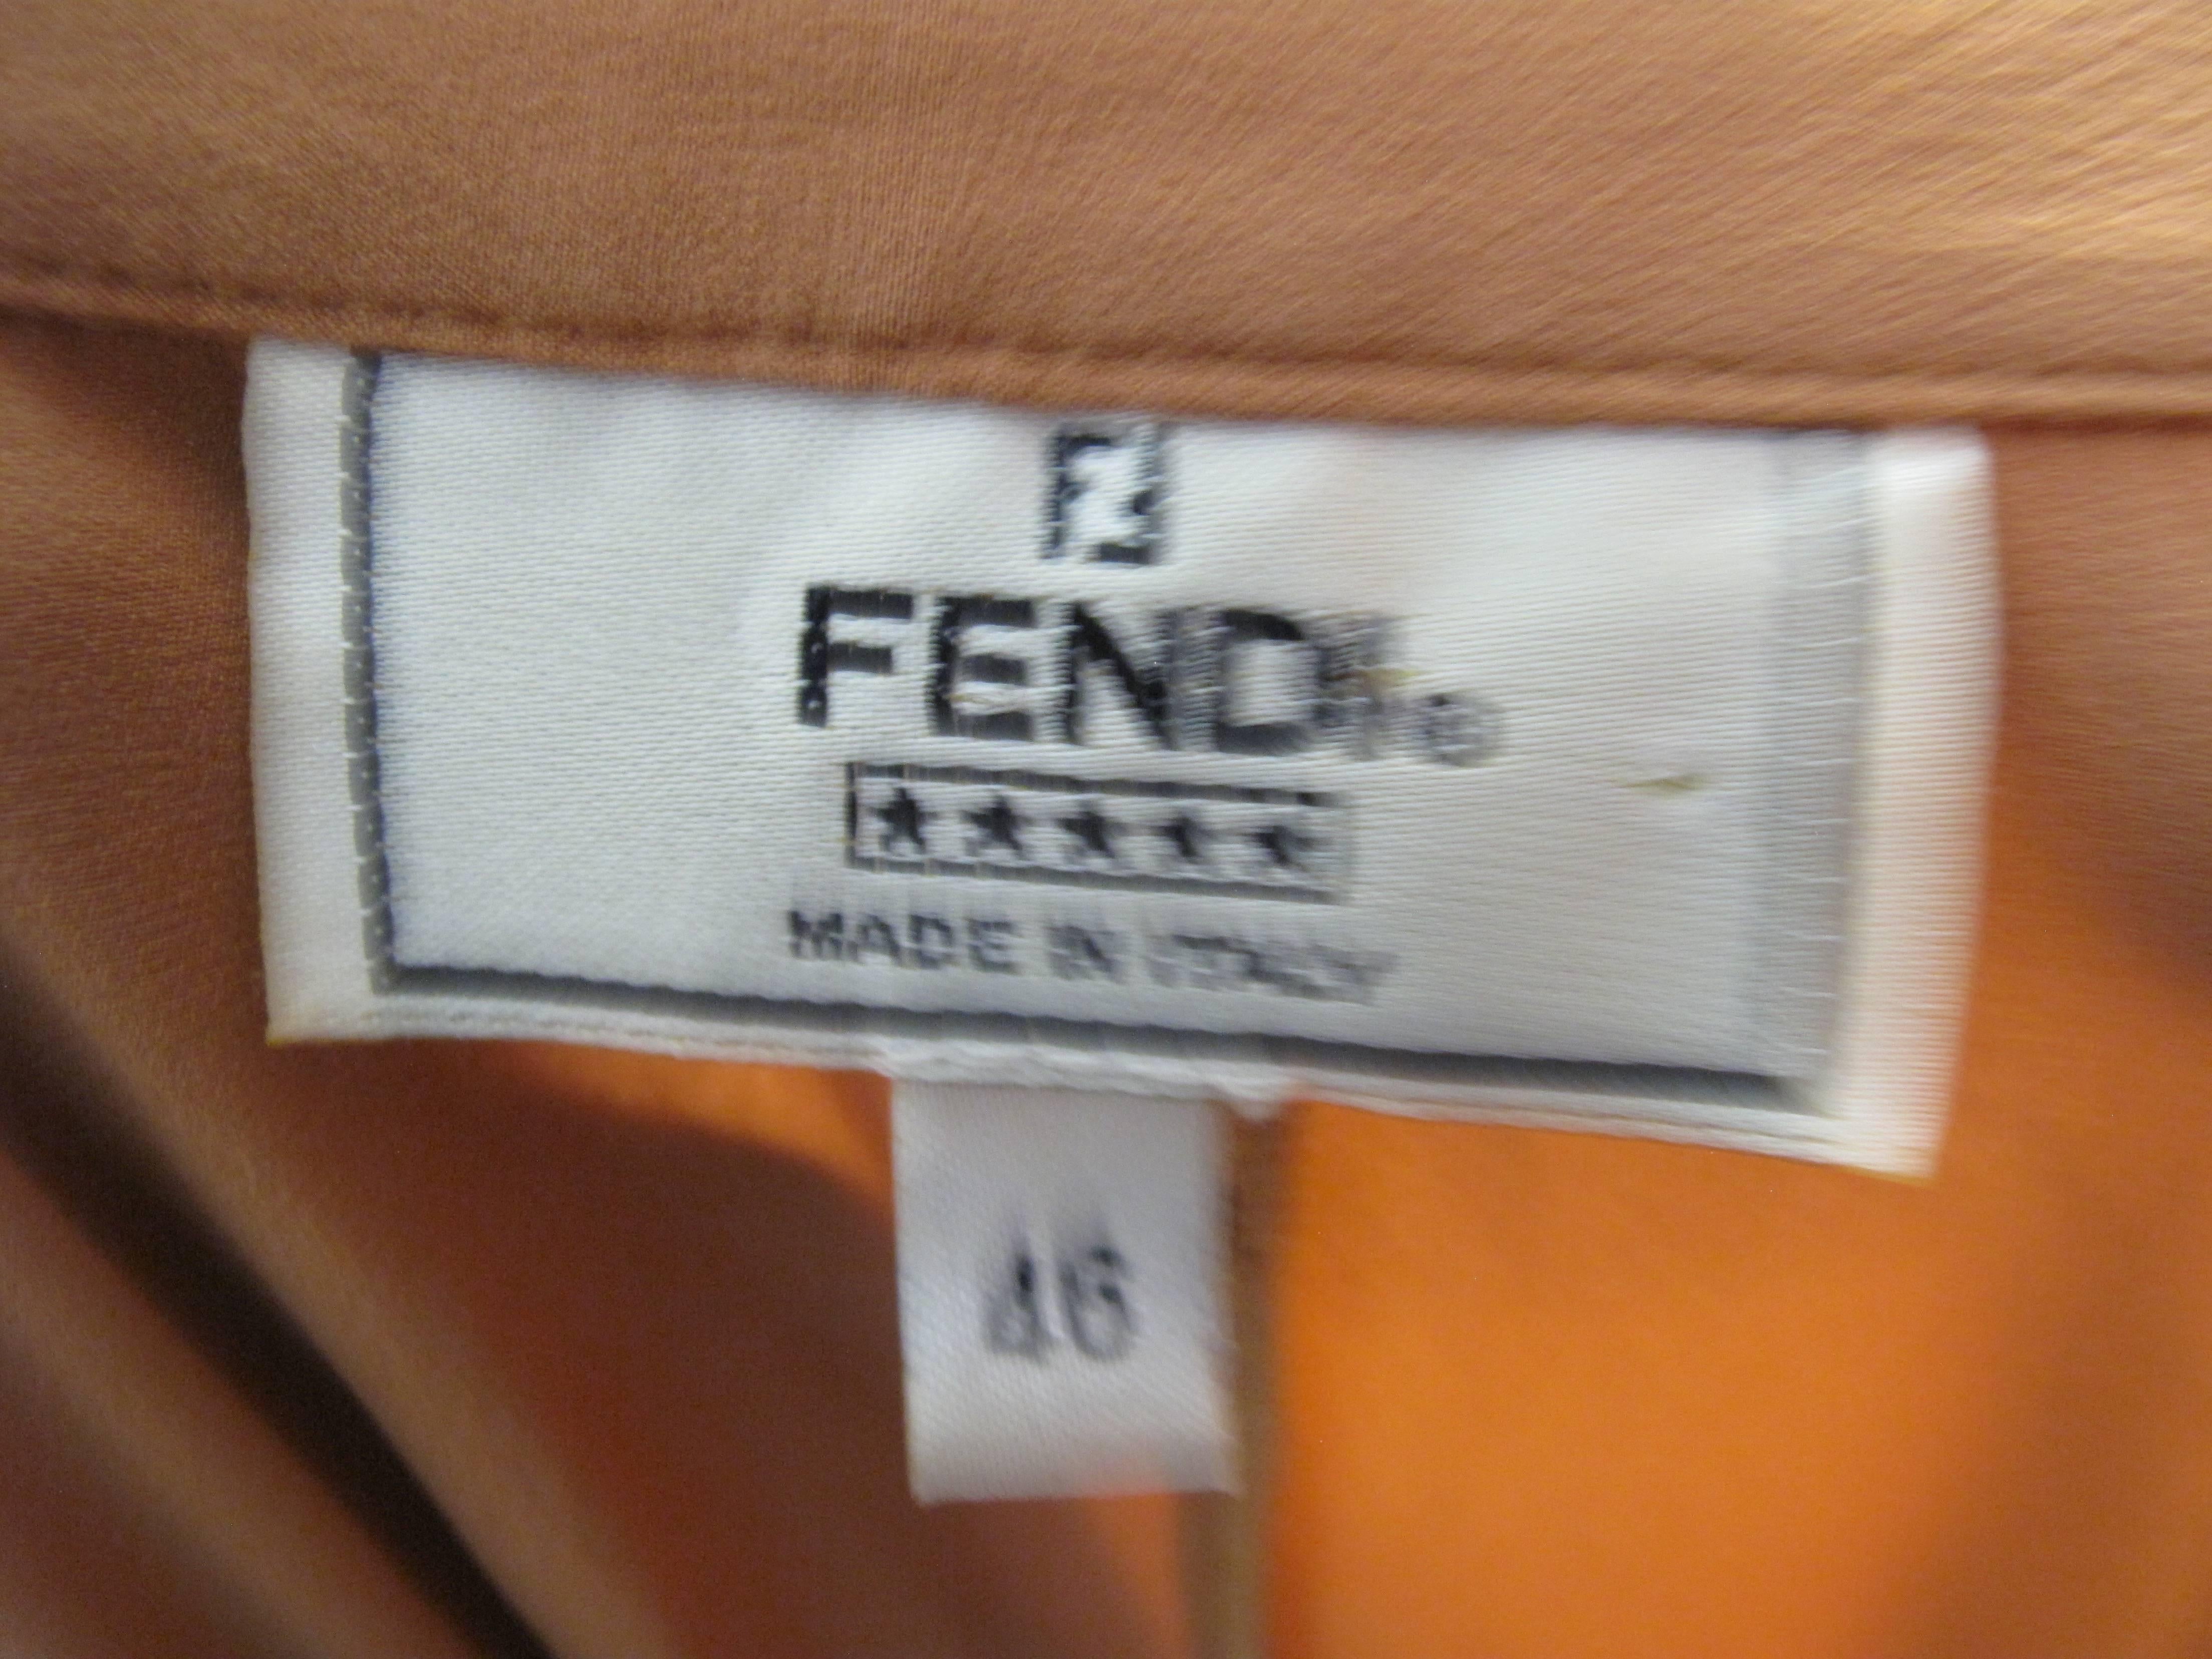 Fendi silk and spandex  top with buttons down front, rusching on sides.  Condition: Excellent. Size 46 ( mannequin is a US size 6 )

We accept returns for refund, please see our terms.  We offer free ground shipping within the US